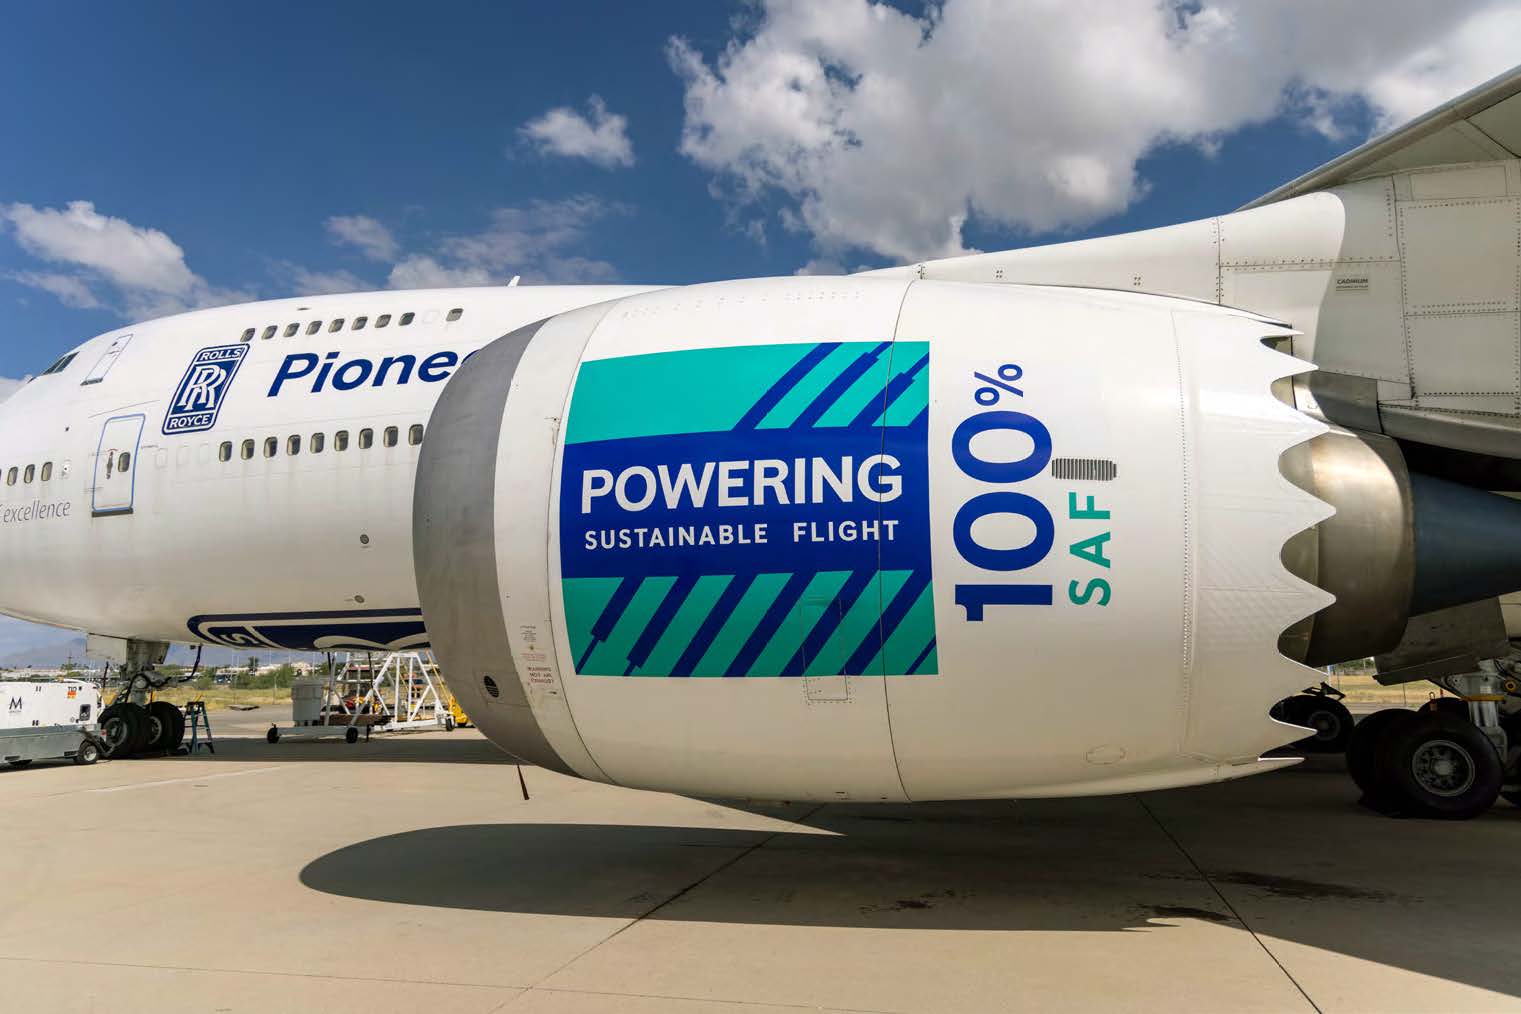 Rolls-Royce Trent-1000 engine operating with 100% SAF on a Boeing 747-200 Flying Test Bed.